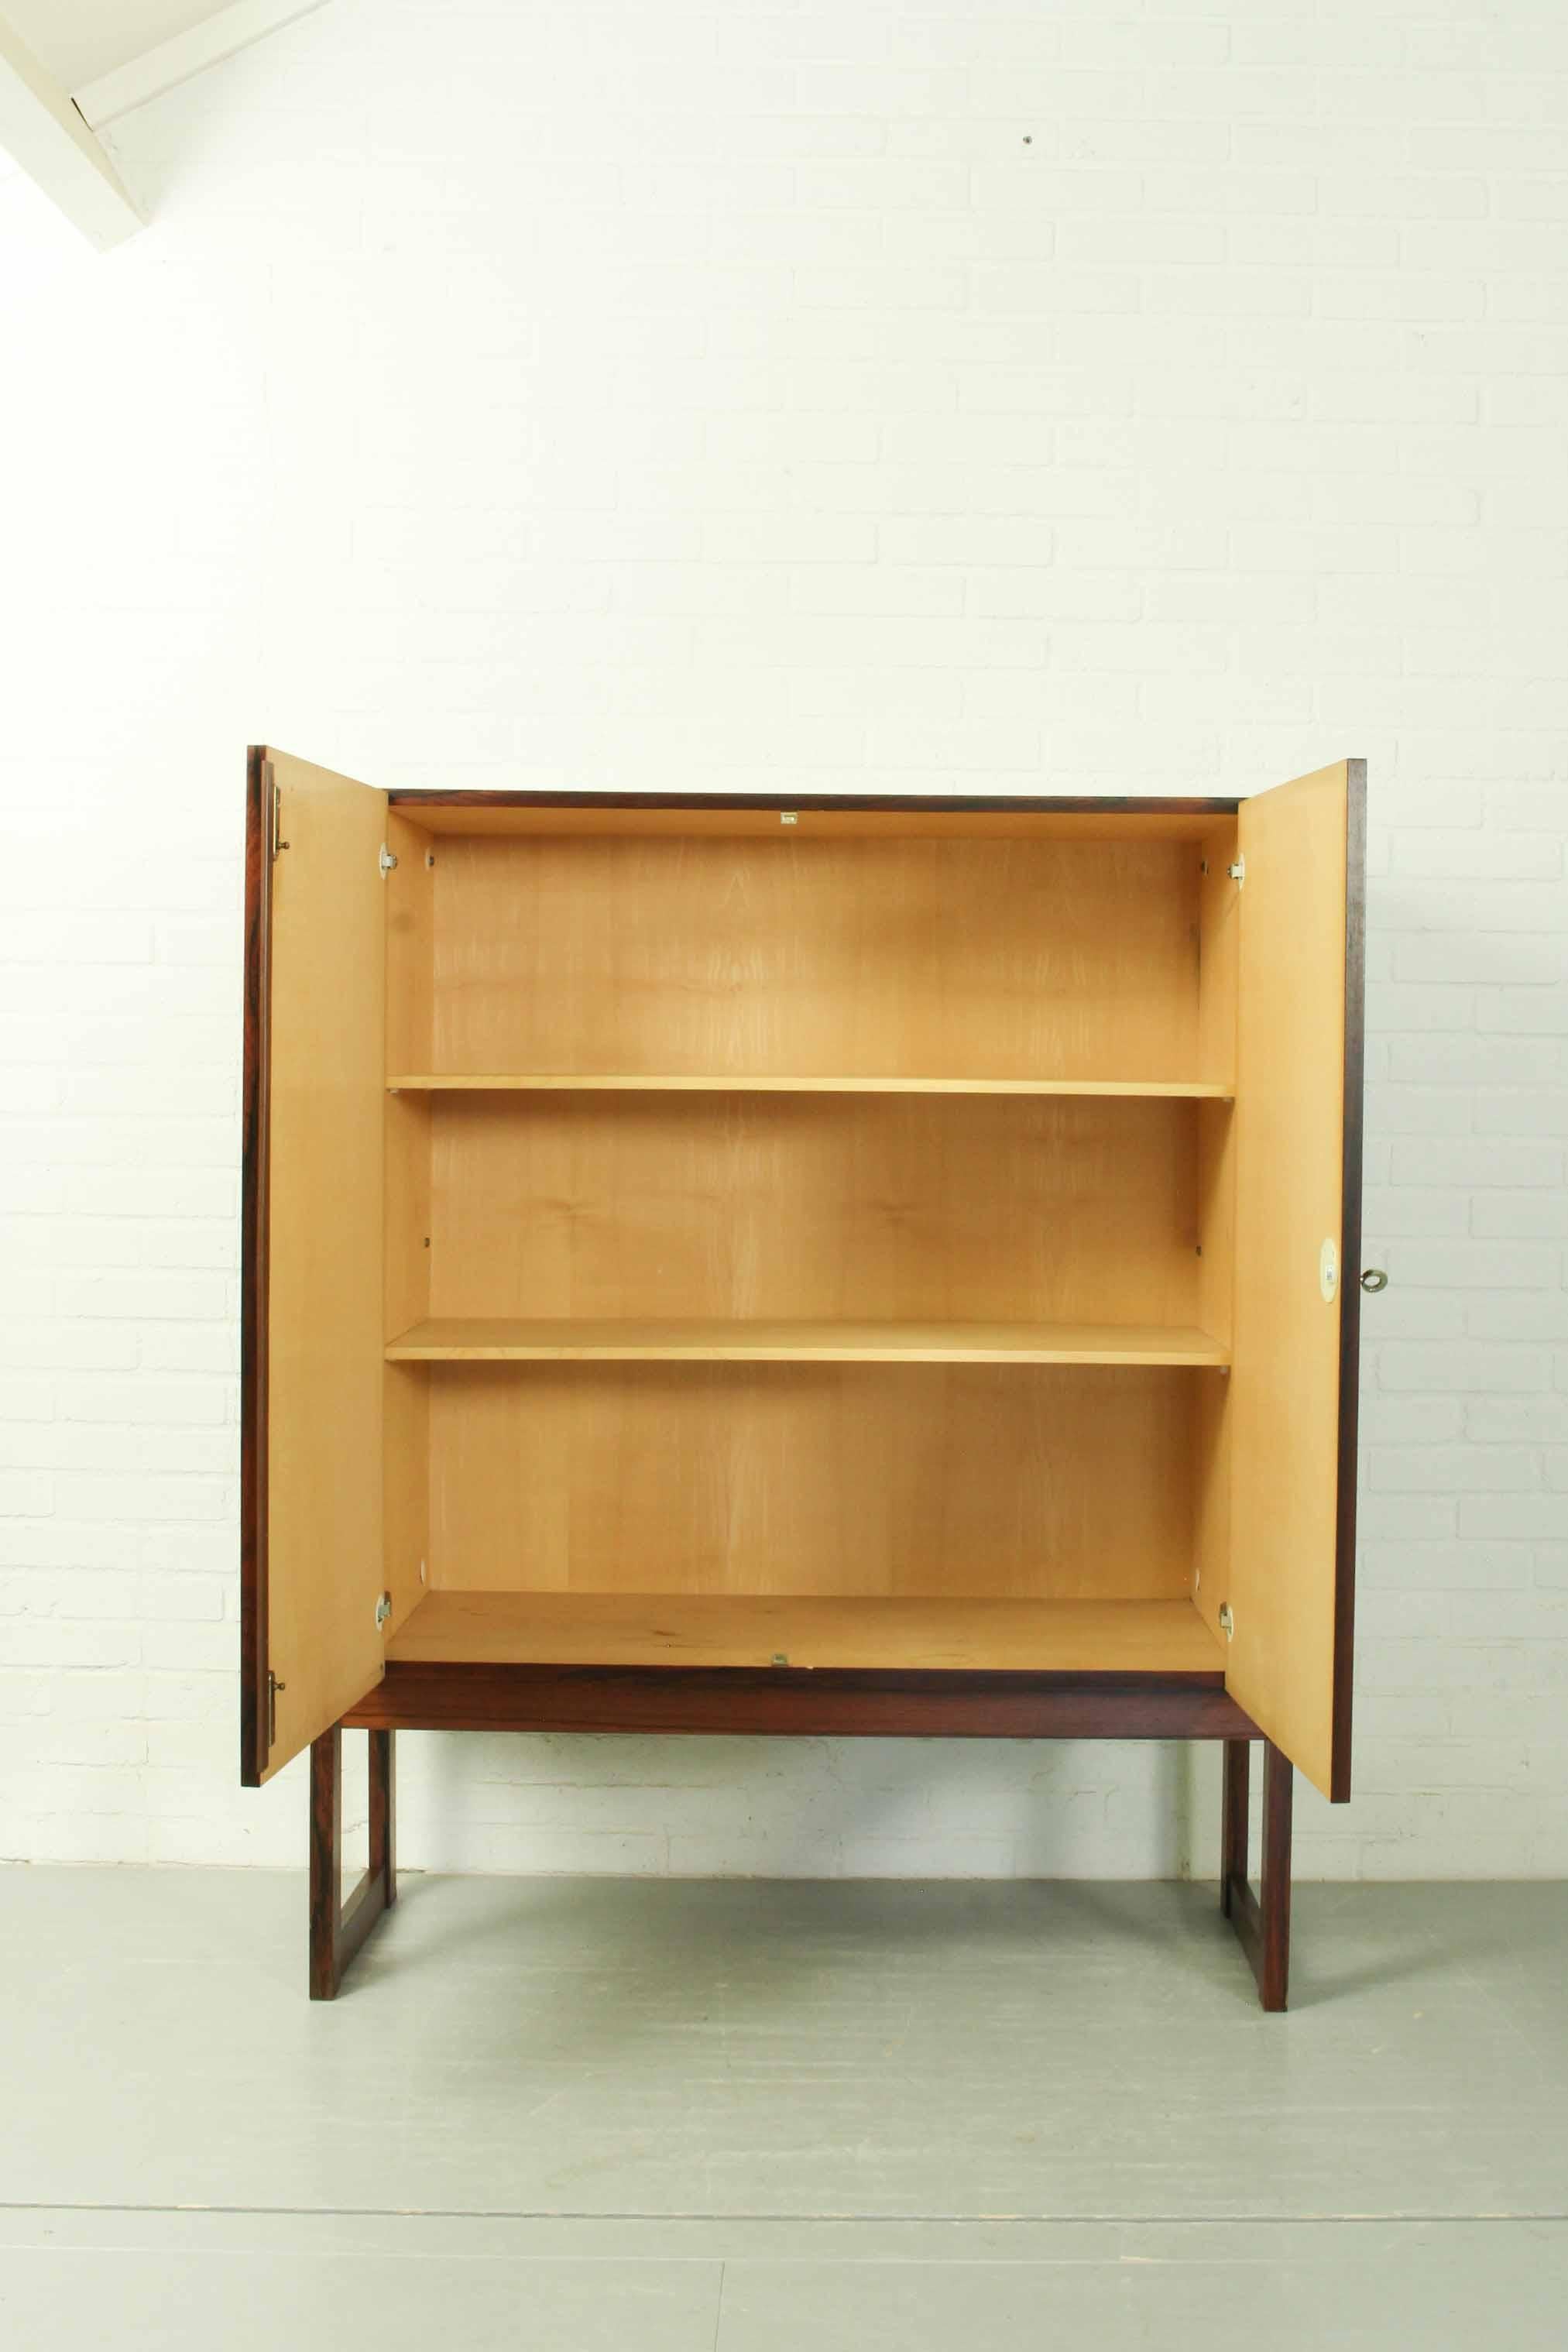 German Highboard “Malmo” Within Wood Frame, Executed in Rio Palissander, 1960s